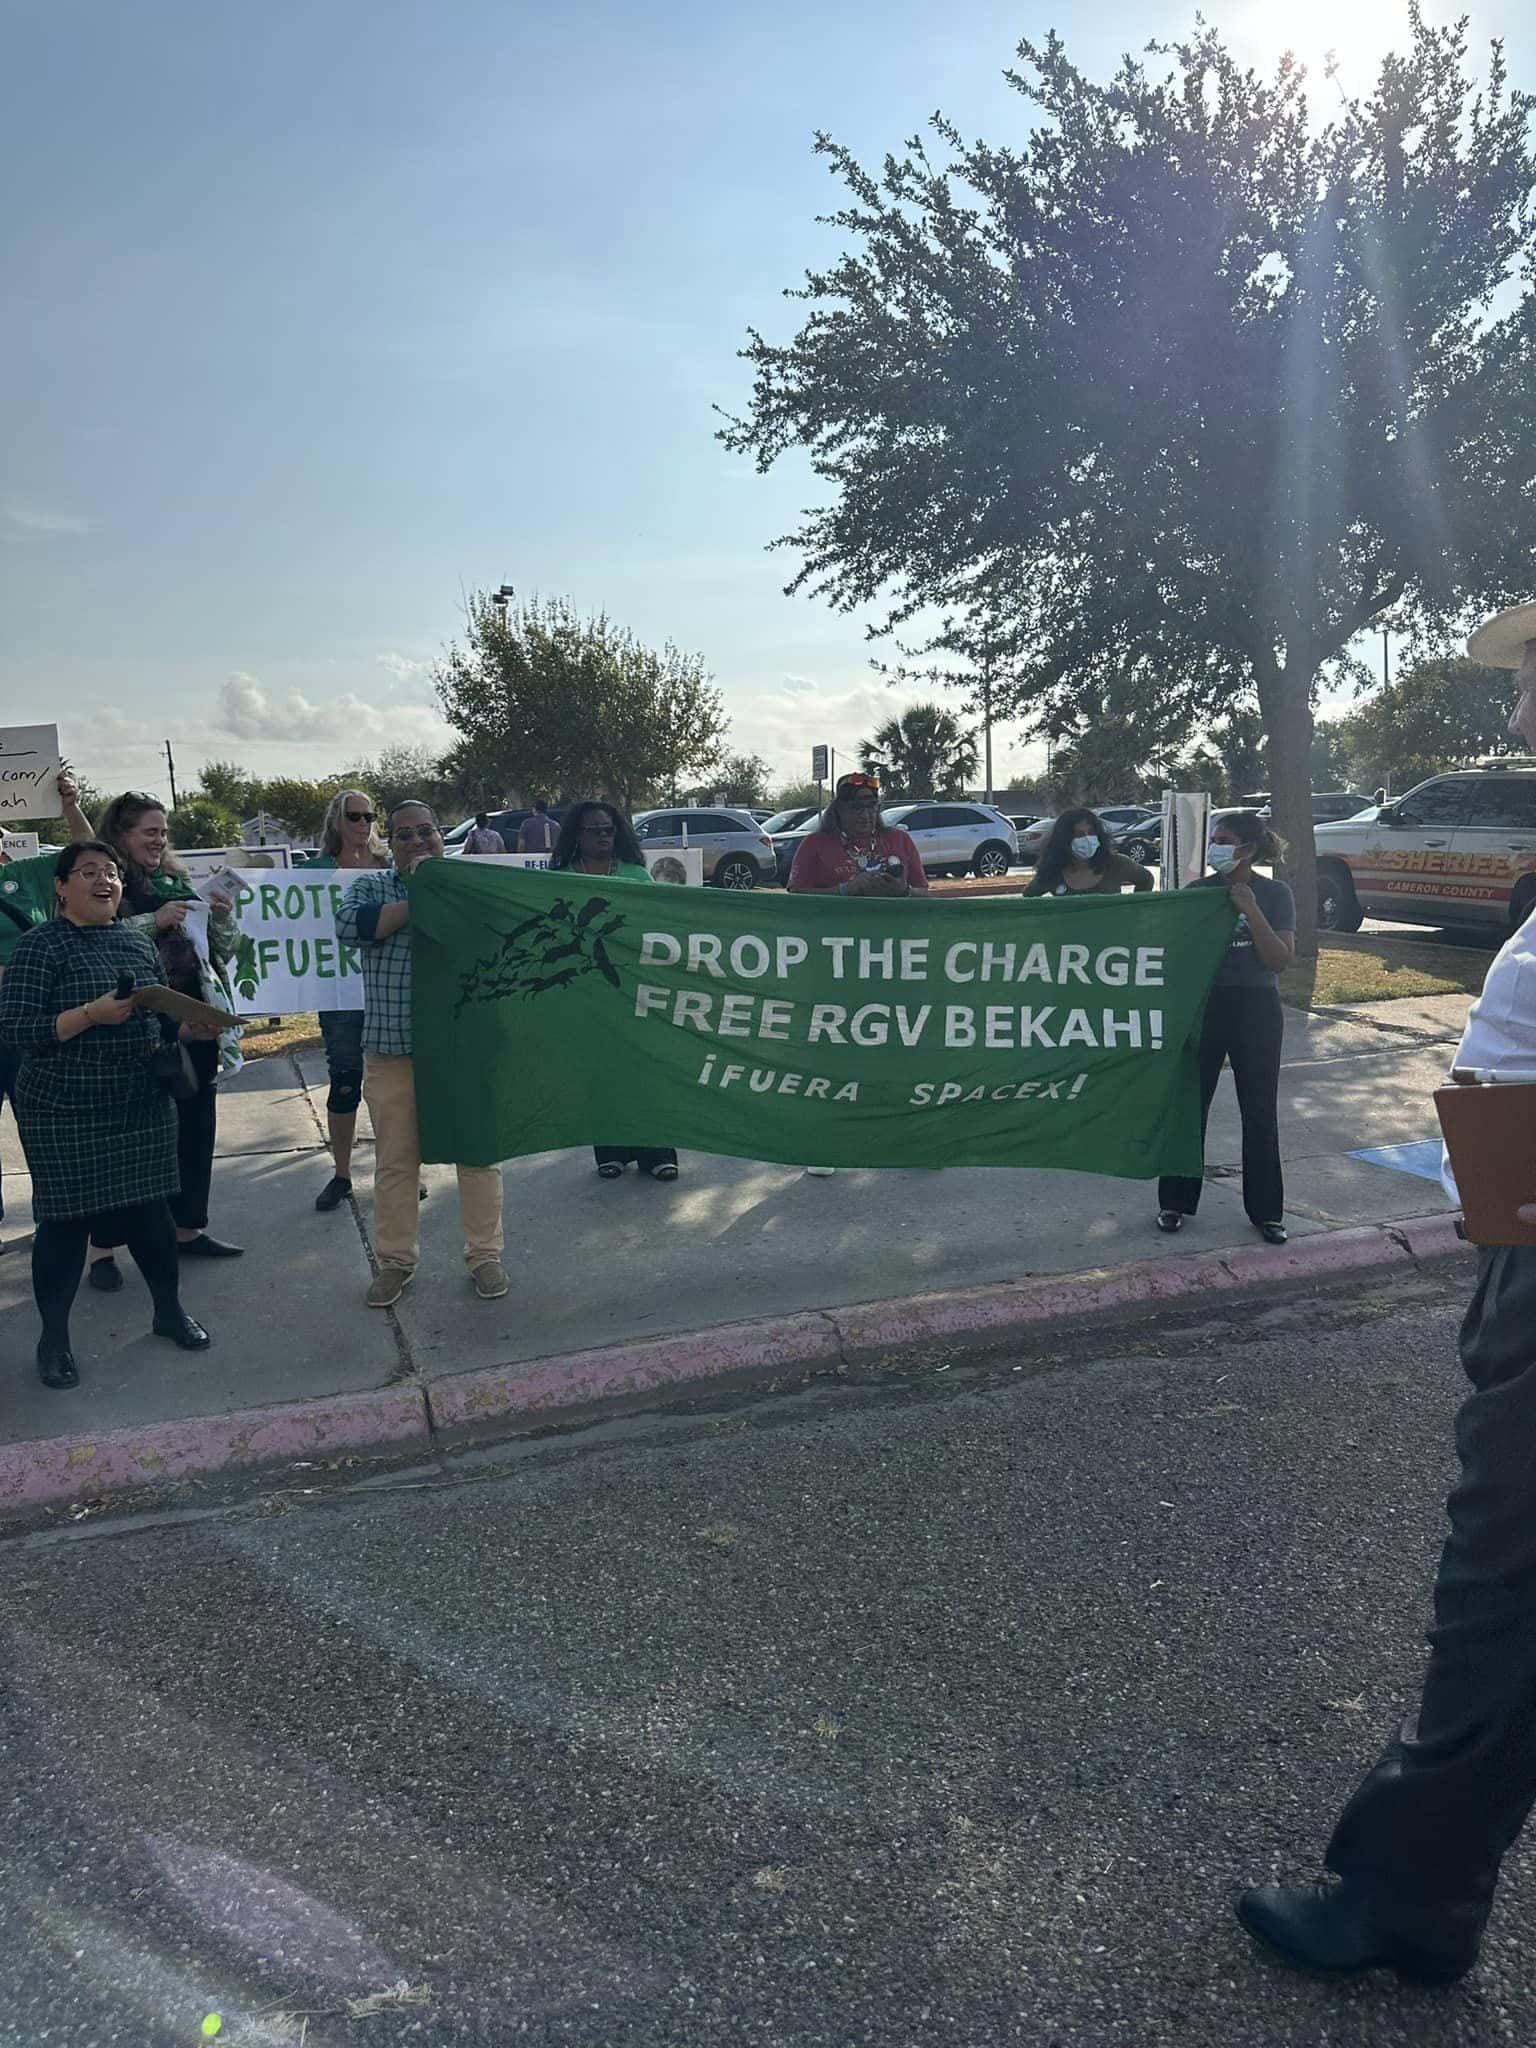 A group of protesters stands together on a street, holding a green banner that reads "DROP THE CHARGE FREE RGV BEKAH!"